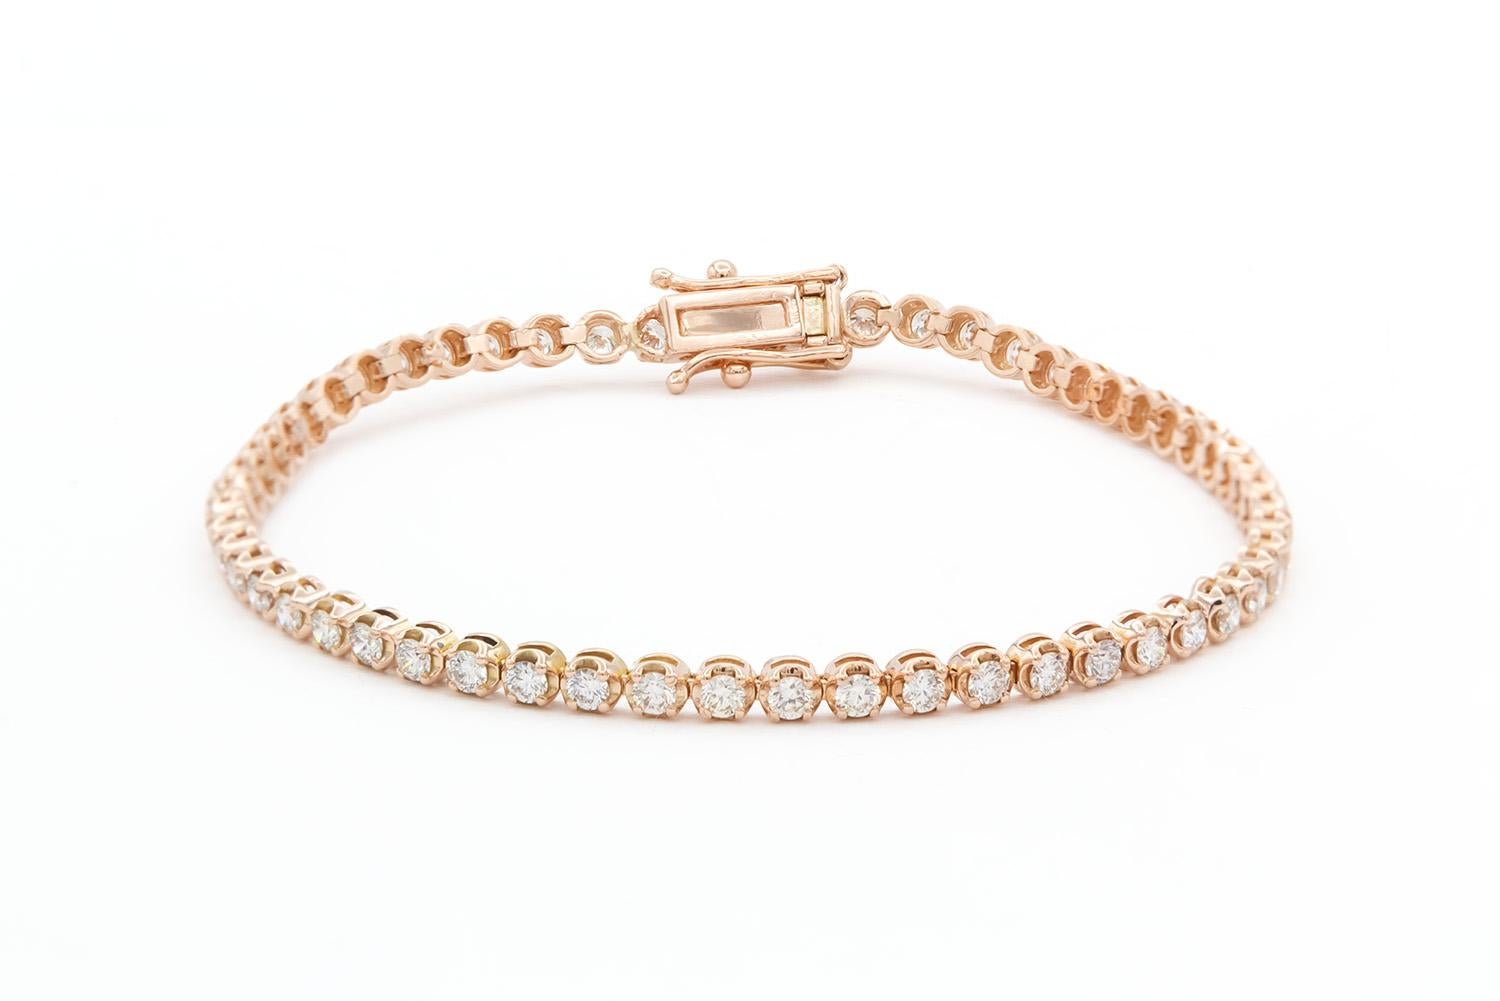 We are pleased to present this beautiful 14k Rose Gold & Diamond Tennis Bracelet . It features 56 round brilliant cut diamonds, each one approximately 0.03ct is size. The total carat weight of the bracelet is approximately 1.68ctw and the diamonds